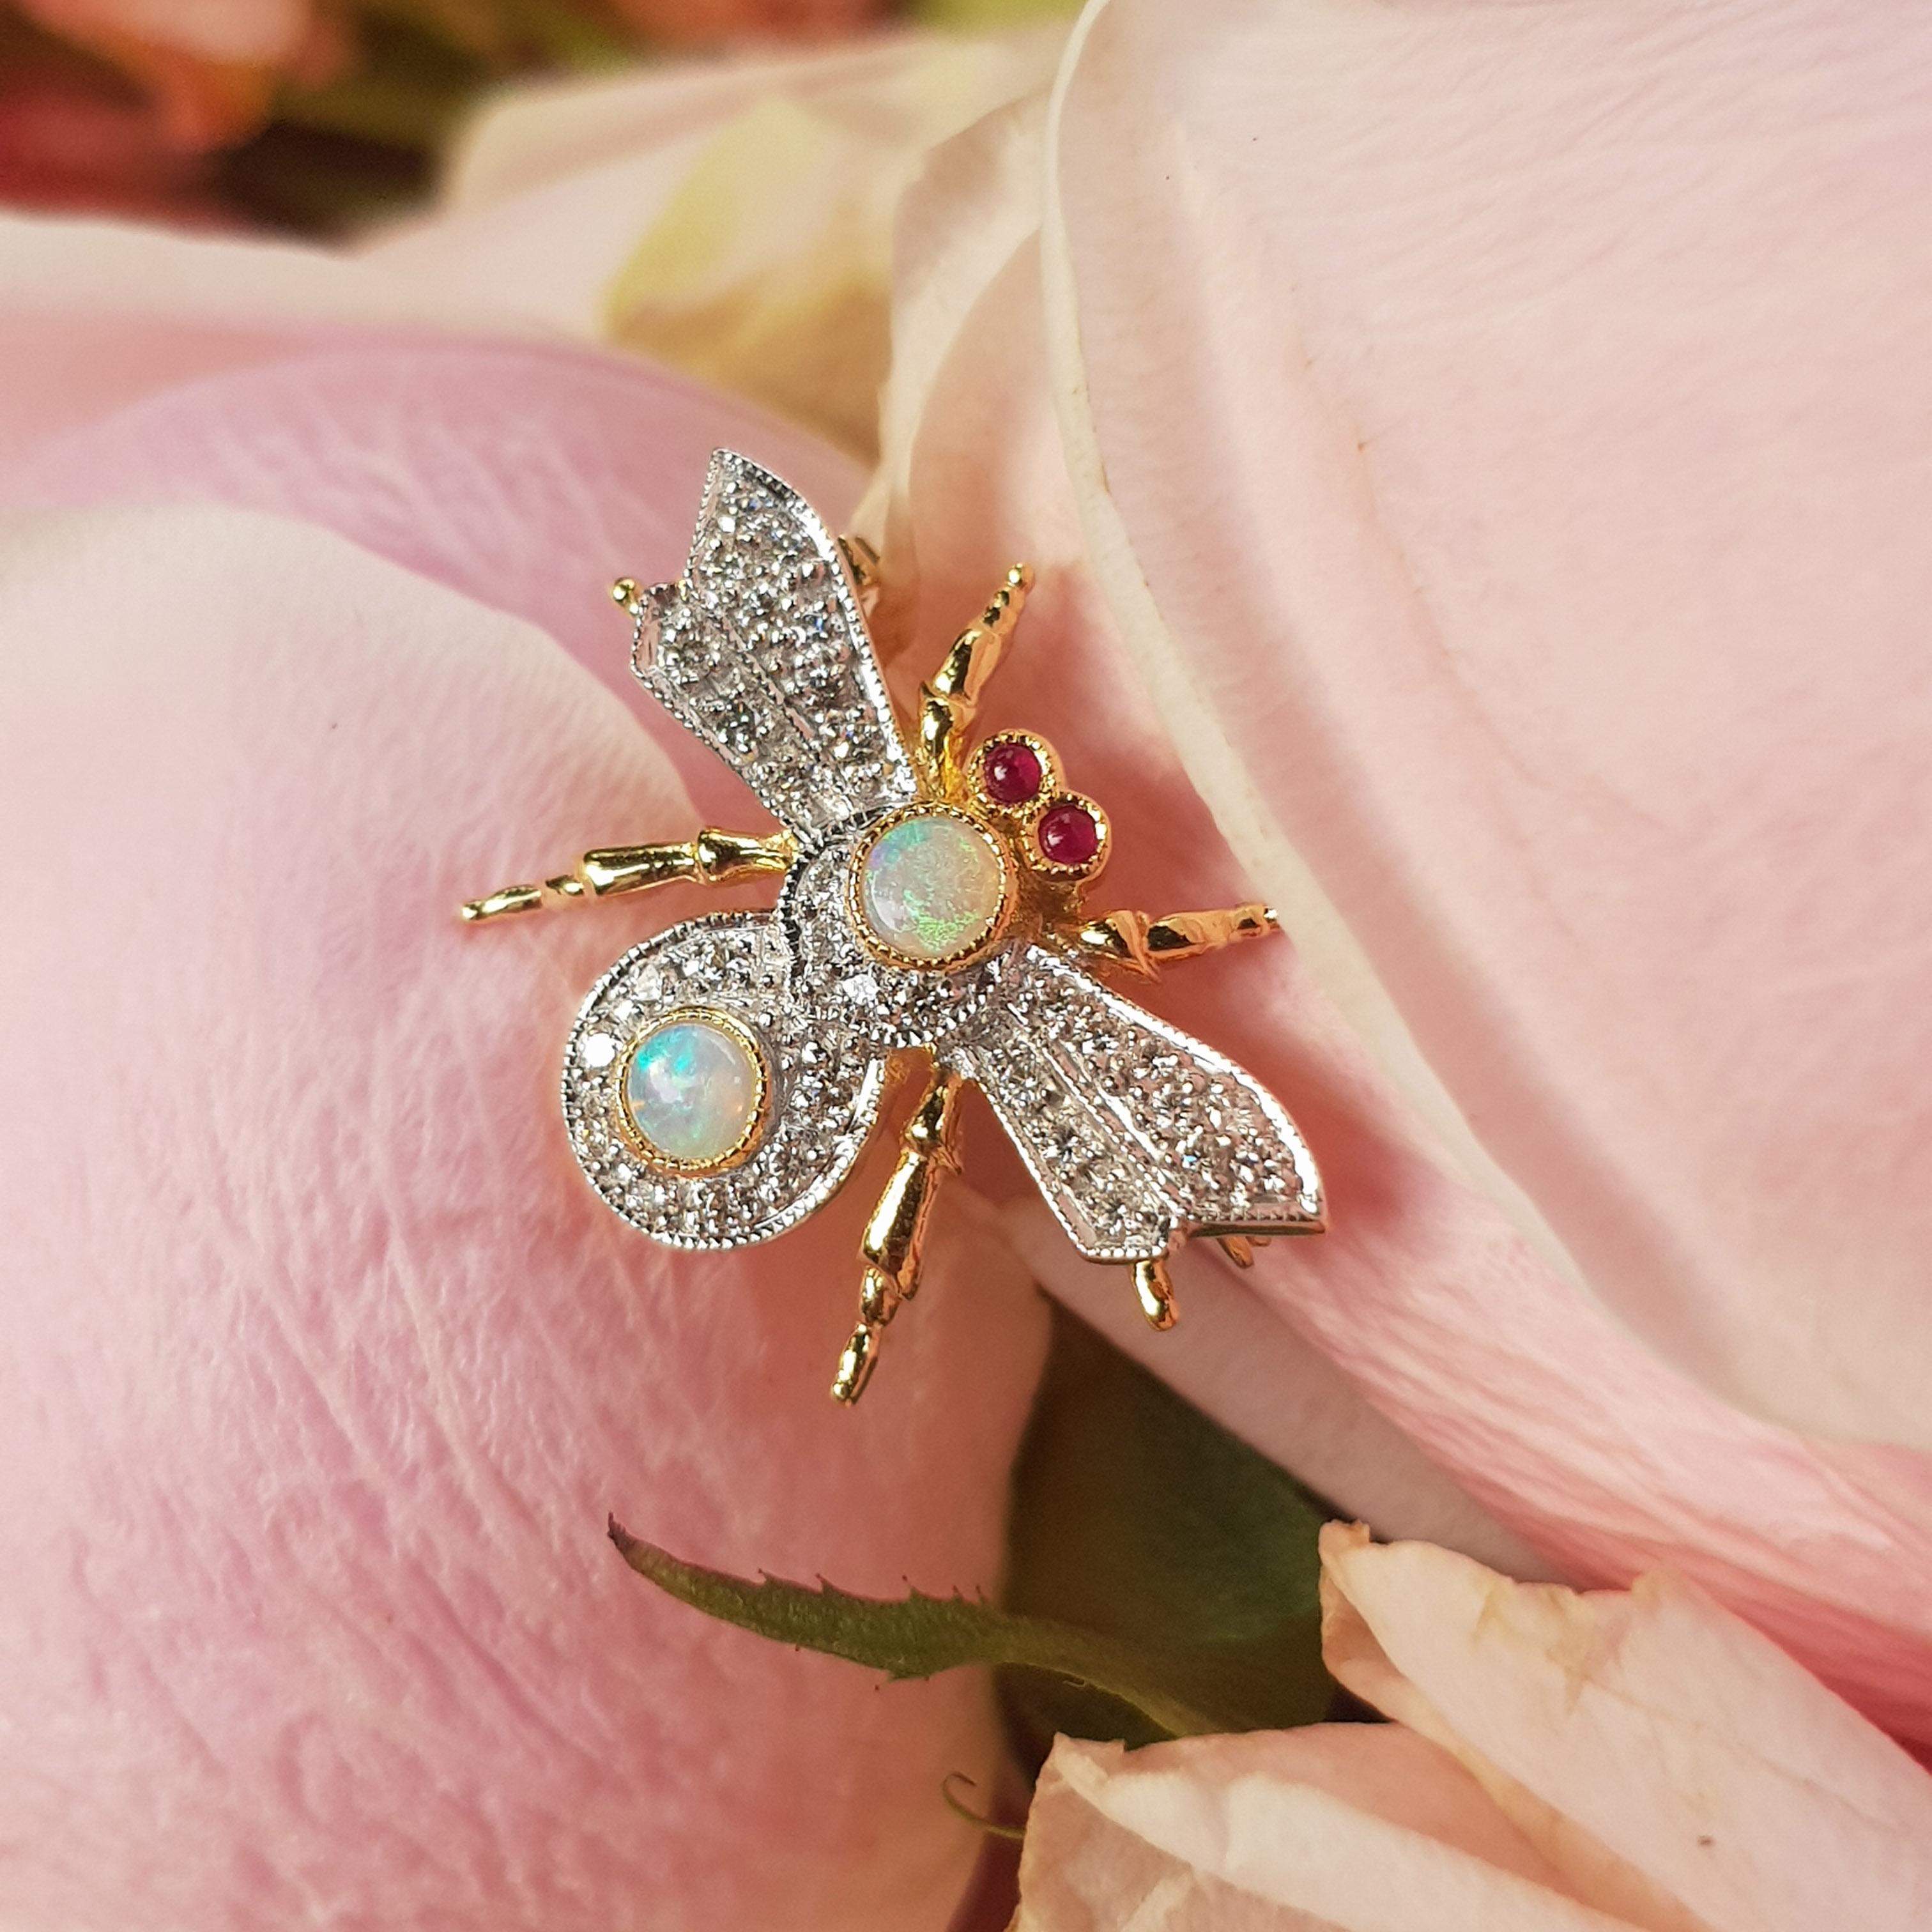 A diamond bee brooch, in the form of a bumble bee in flight, the delicately flying wings, domed body and stretched legs encrusted with two opal on its body, round cut diamonds, with ruby eyes, all set in 18k gold mounting. This gorgeous, glittering